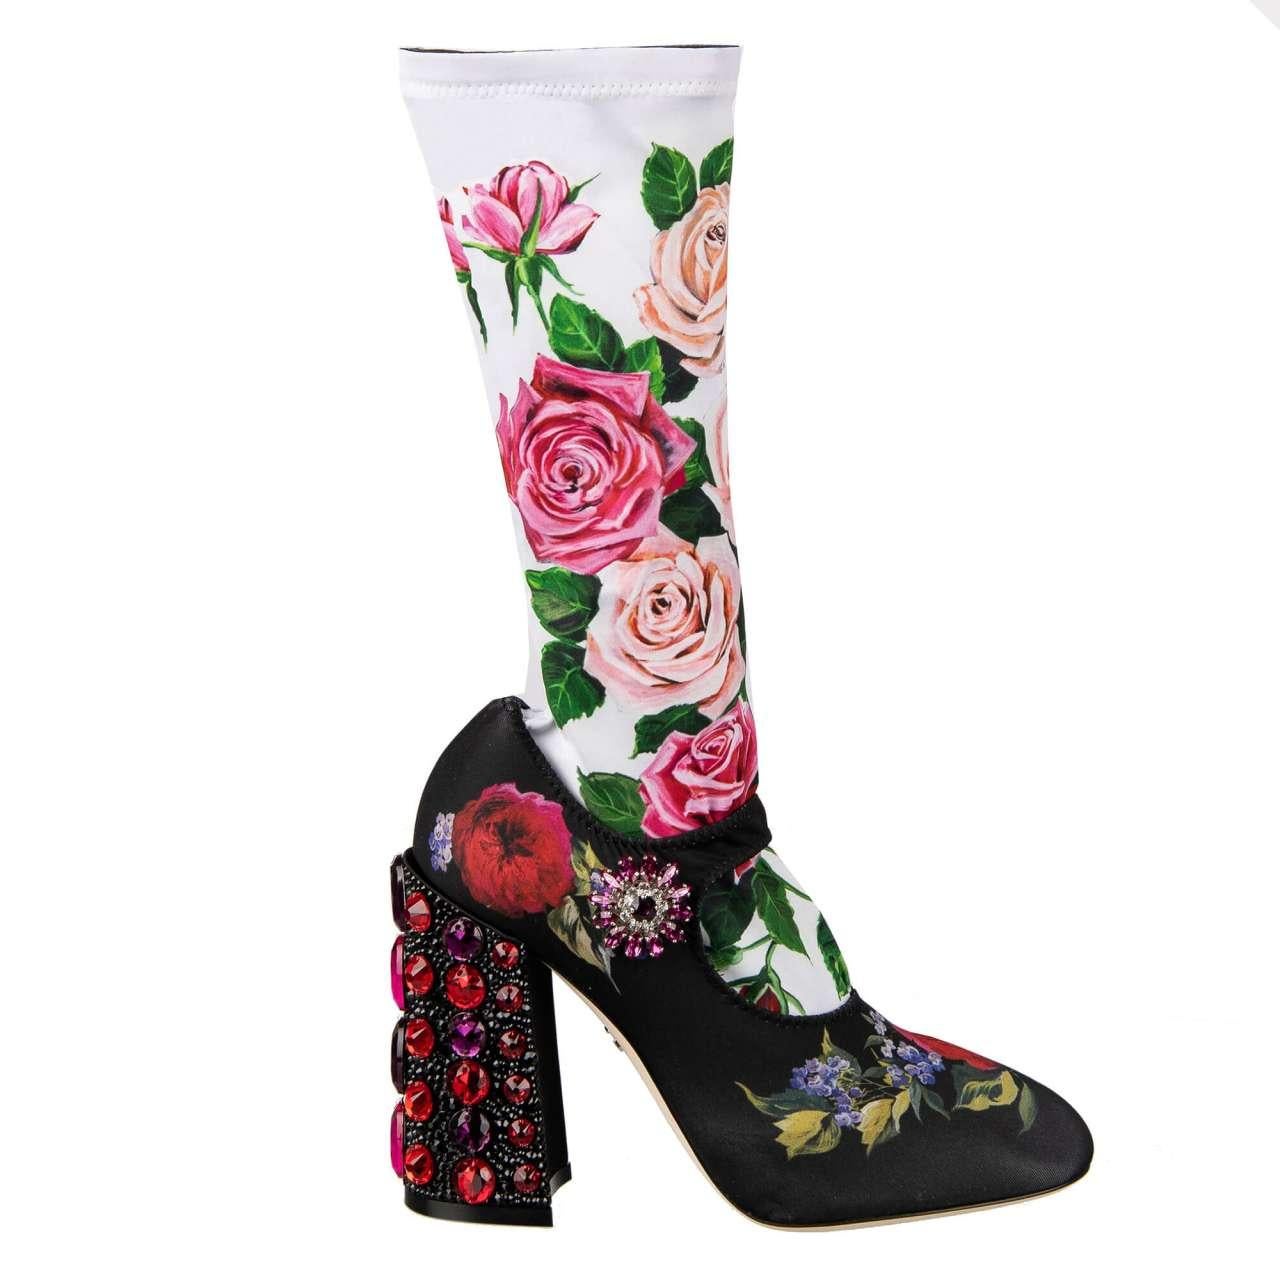 D&G Roses Printed Elastic Socks Pumps VALLY with Crystals Heel Black White 38 For Sale 3